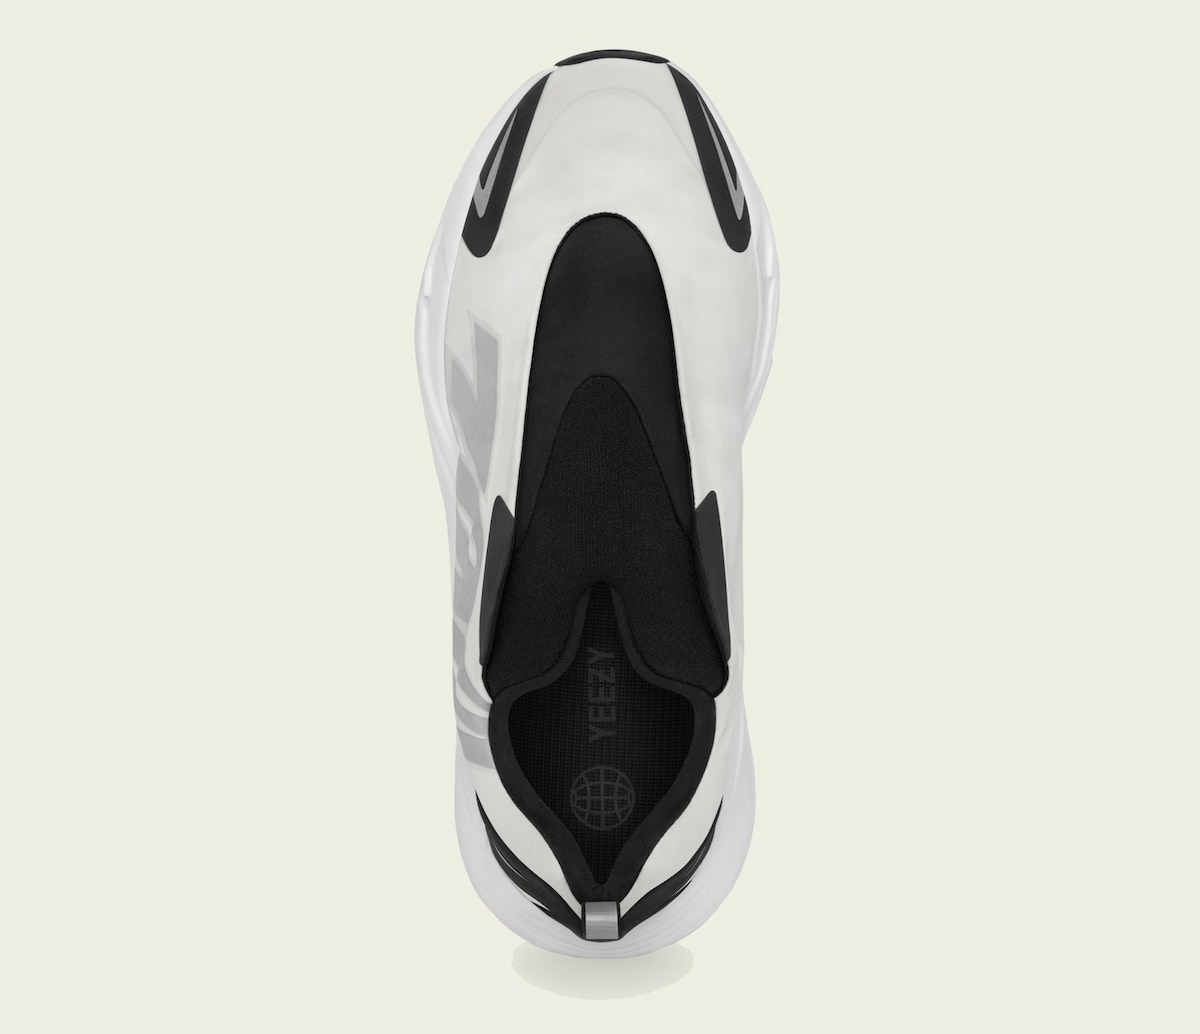 yeezy-700-mnvn-laceless-analog-release-date-3